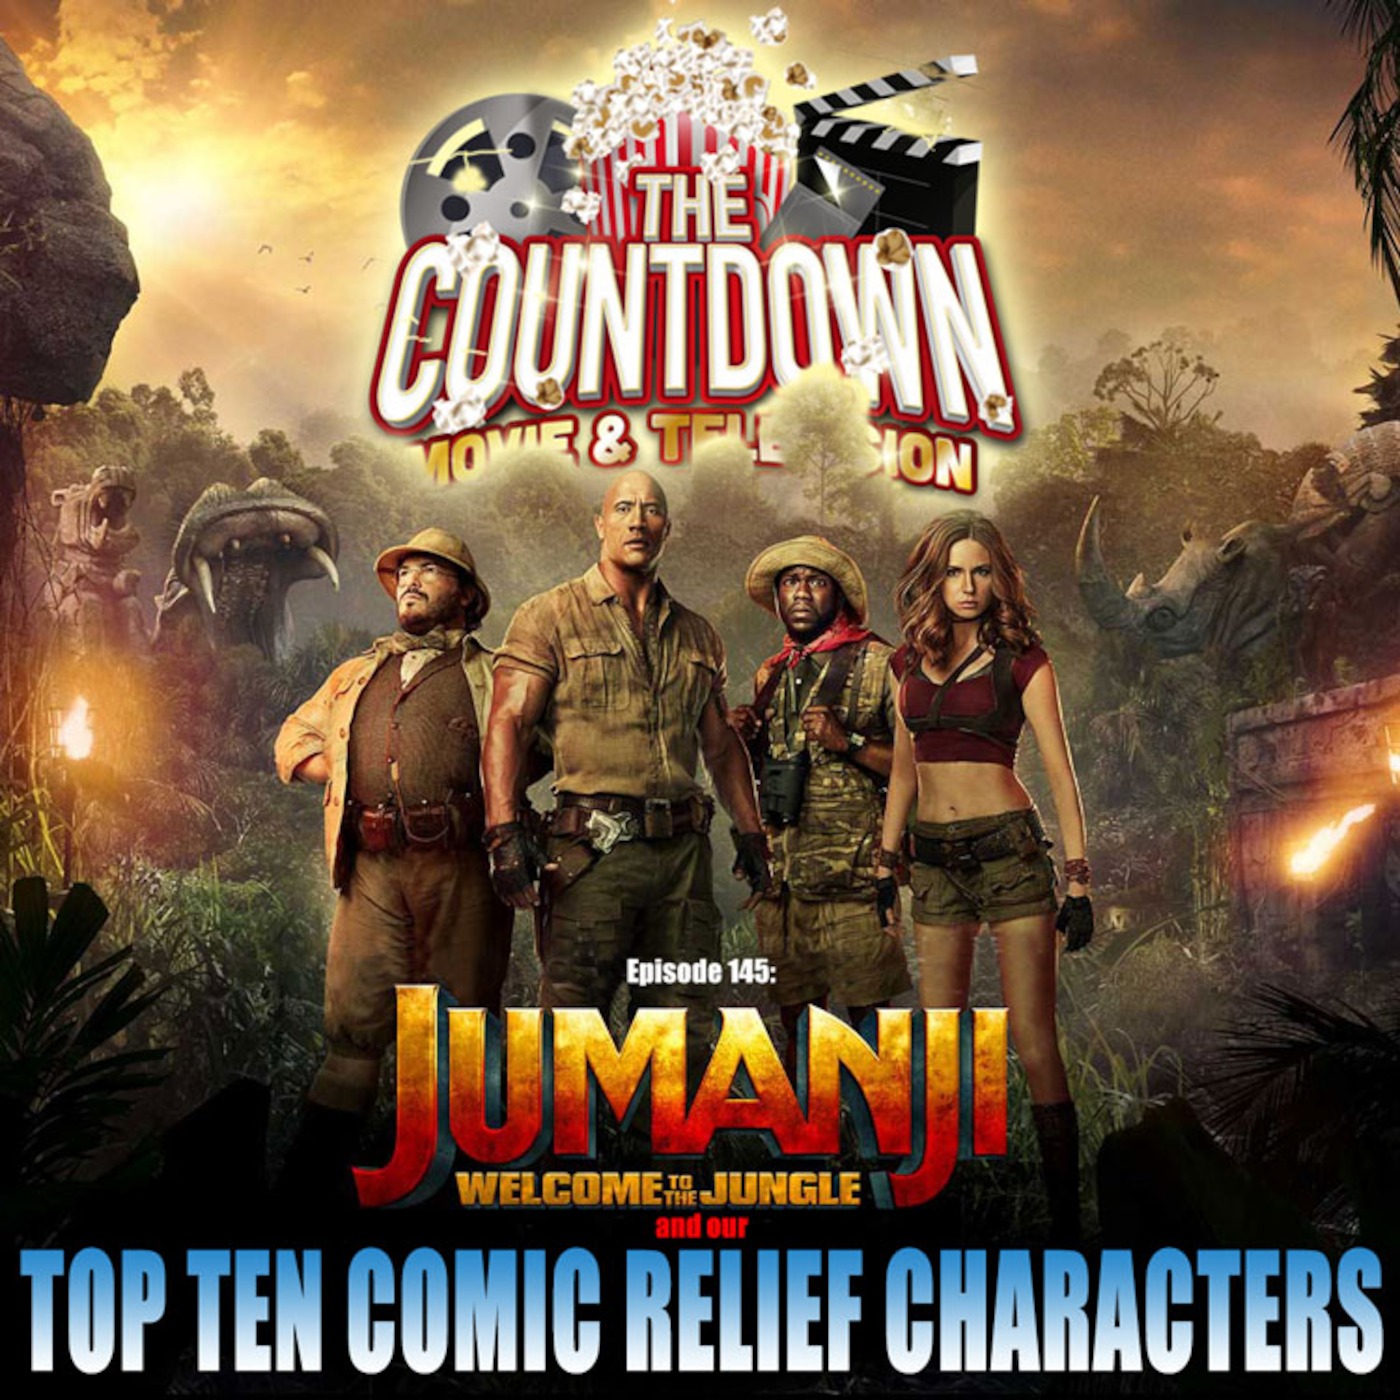 Episode 145: Top 10 Comic Relief Characters / Jumanji: Welcome to the Jungle